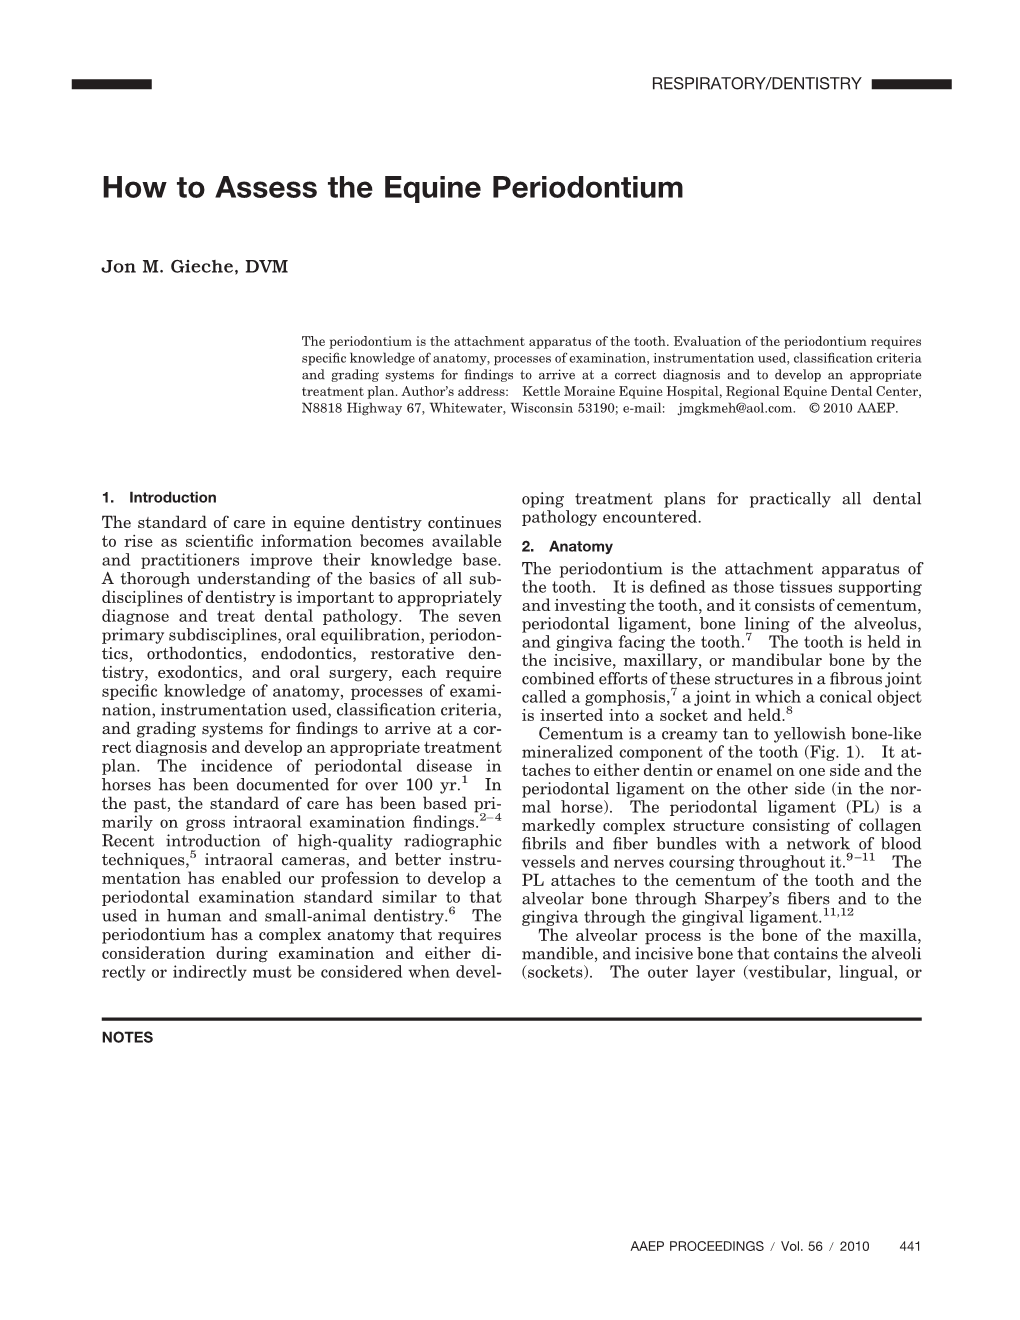 How to Assess the Equine Periodontium